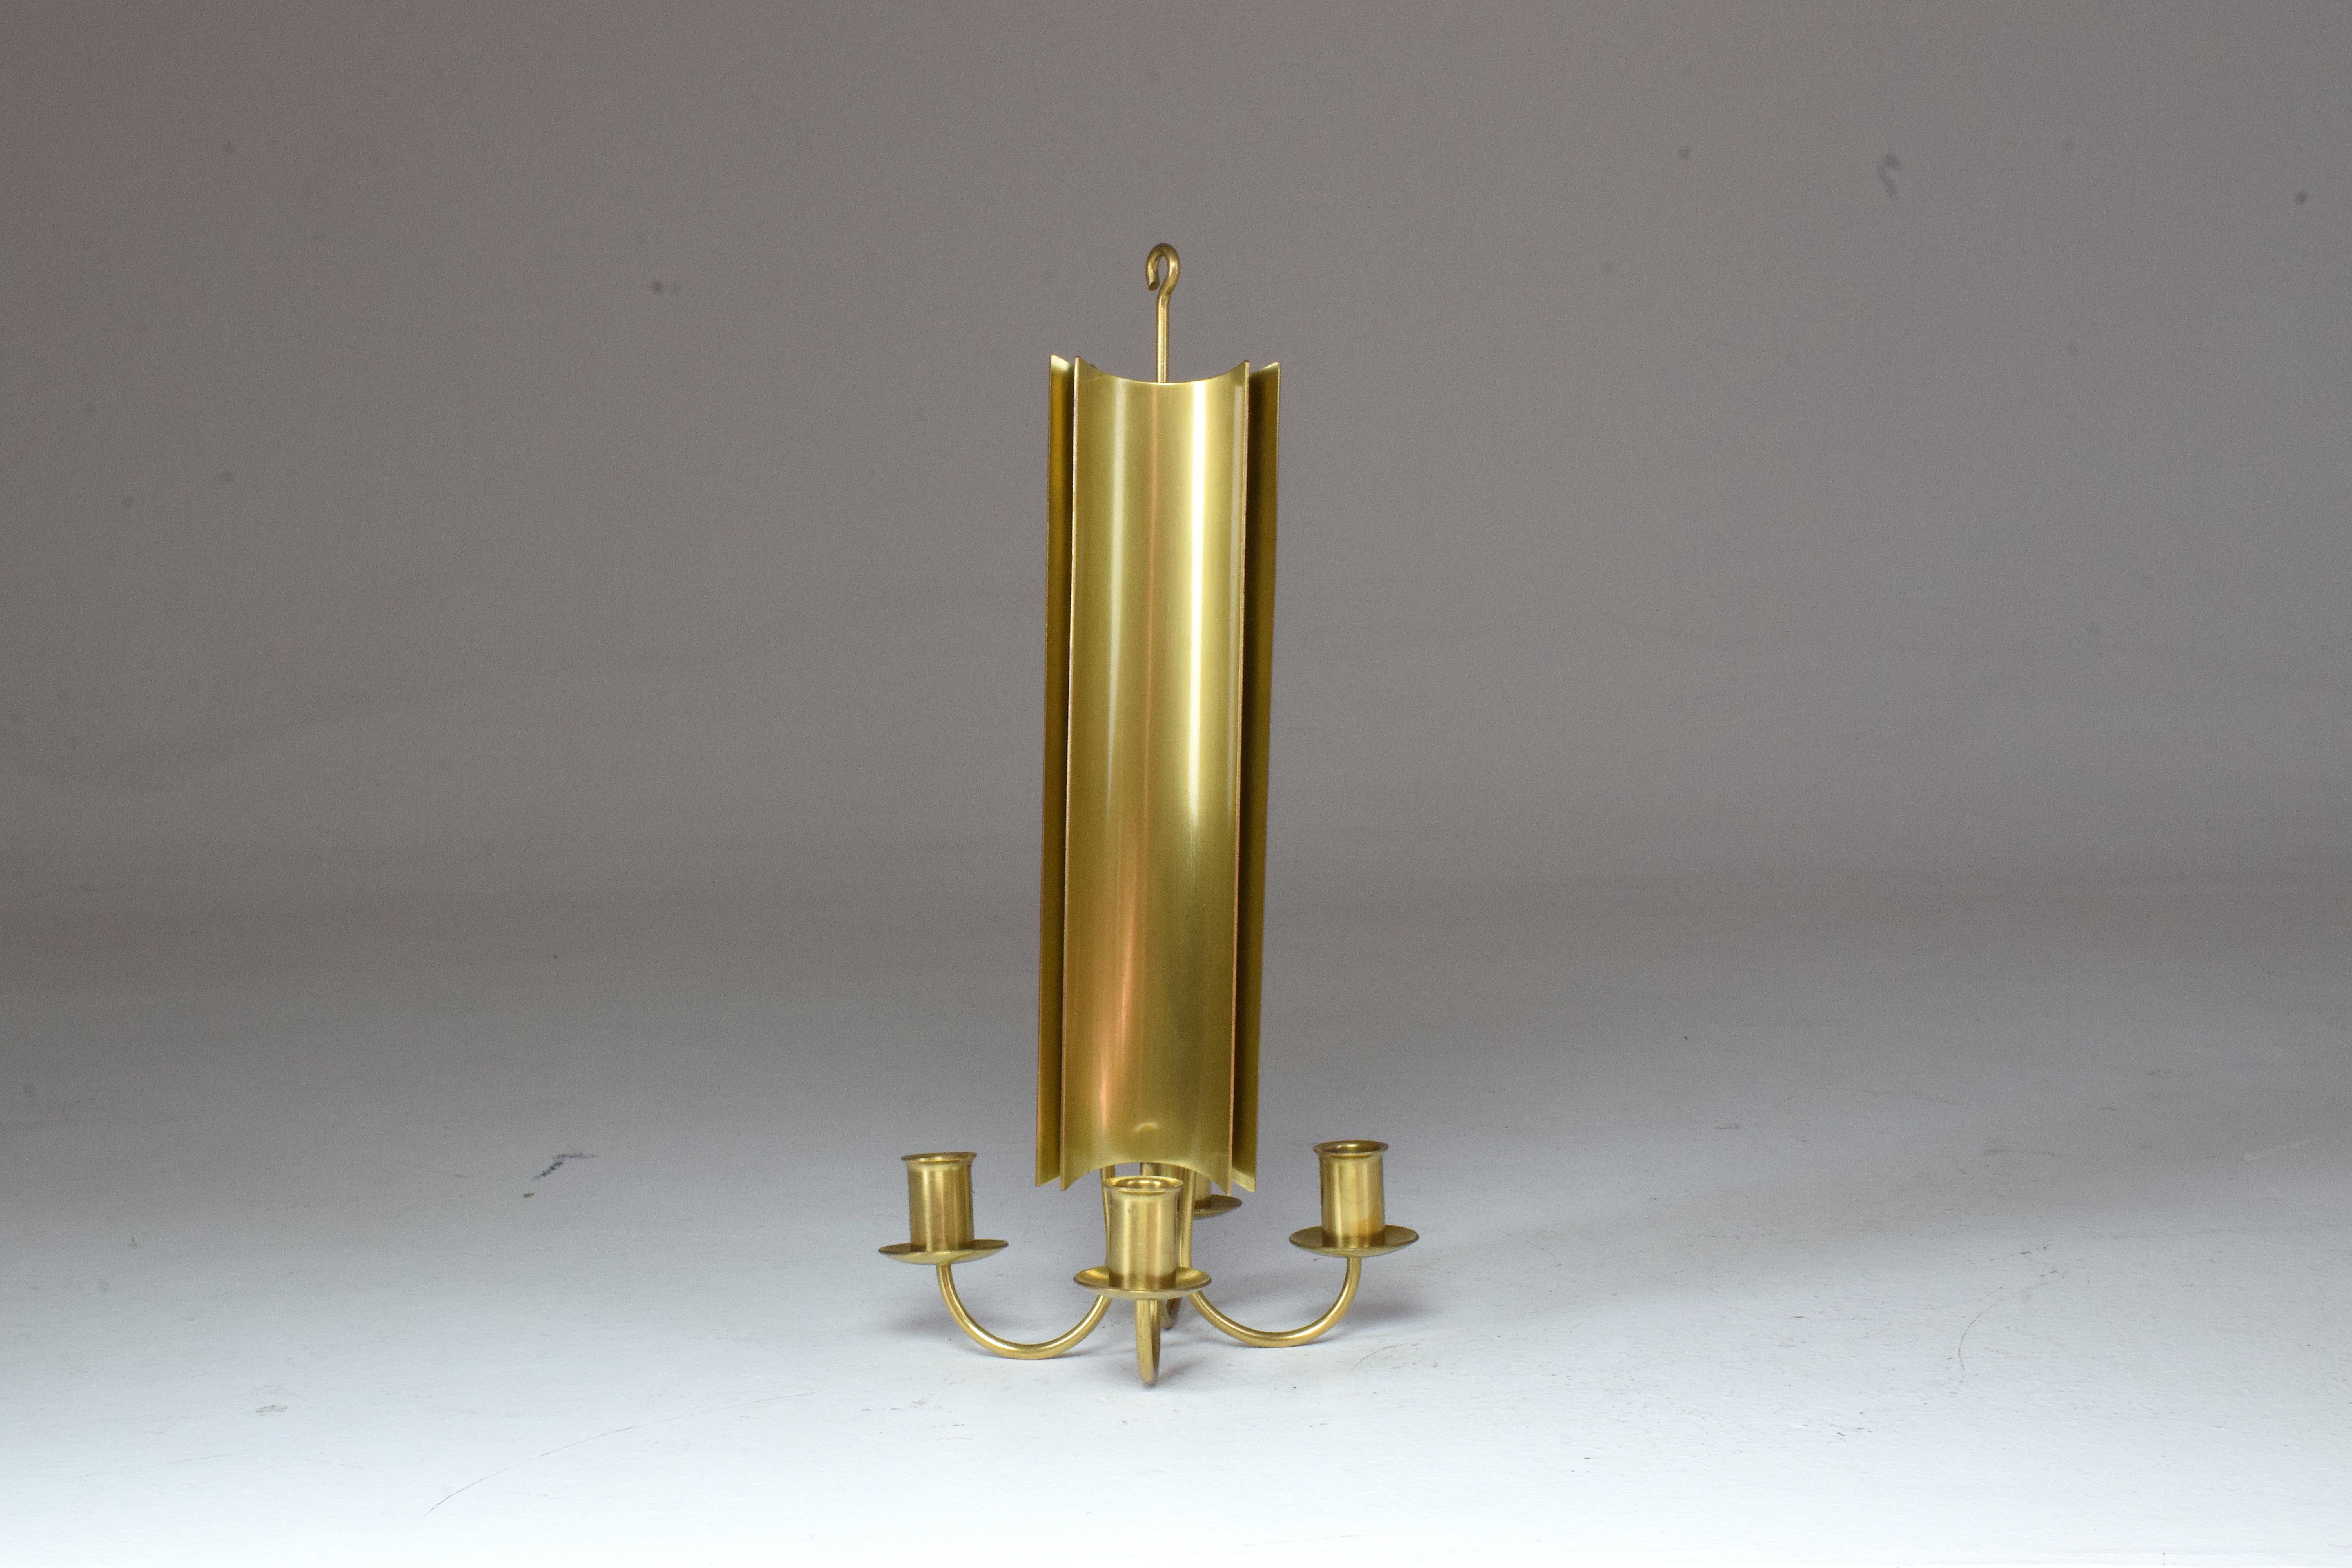 A 20th century vintage Scandinavian candelabra or candleholder by Pierre Forssell for Skultana in solid gold brass with four arms and designed with a holder. A unique decorative piece. Made in Sweden, circa 1960s.

About us: 
Spirit Gallery presents